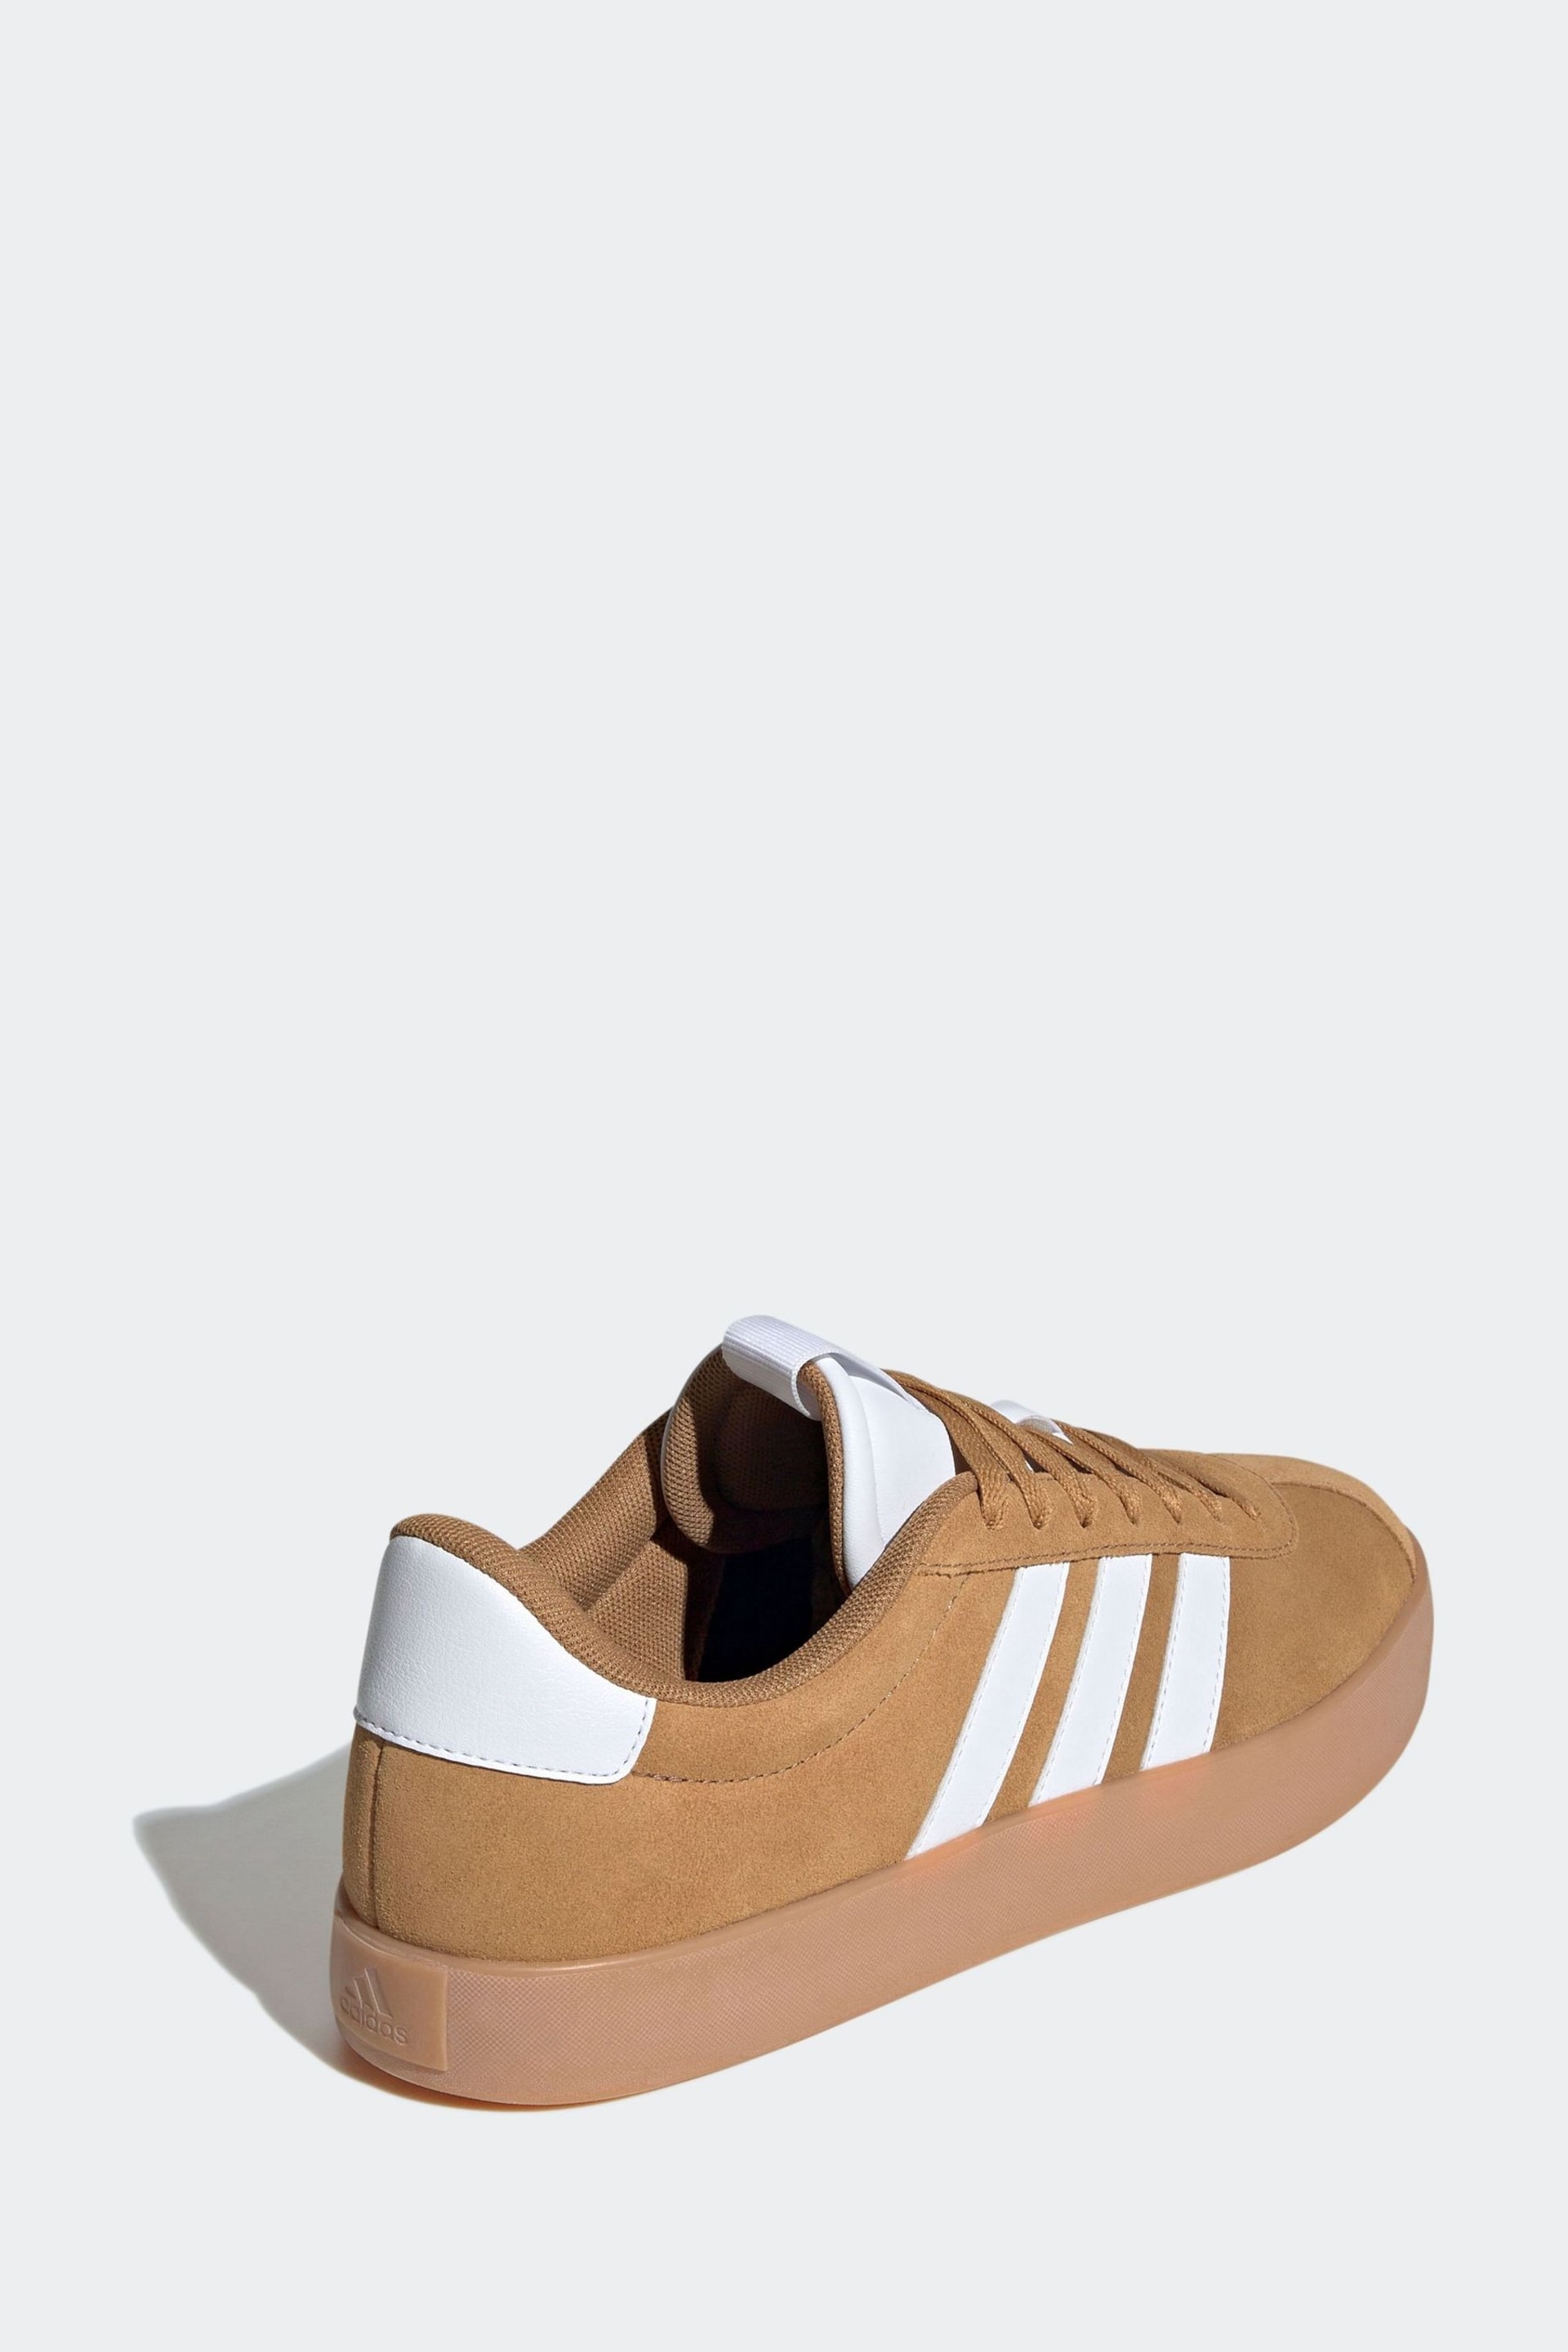 adidas Nude VL Court 3.0 Trainers - Image 4 of 8